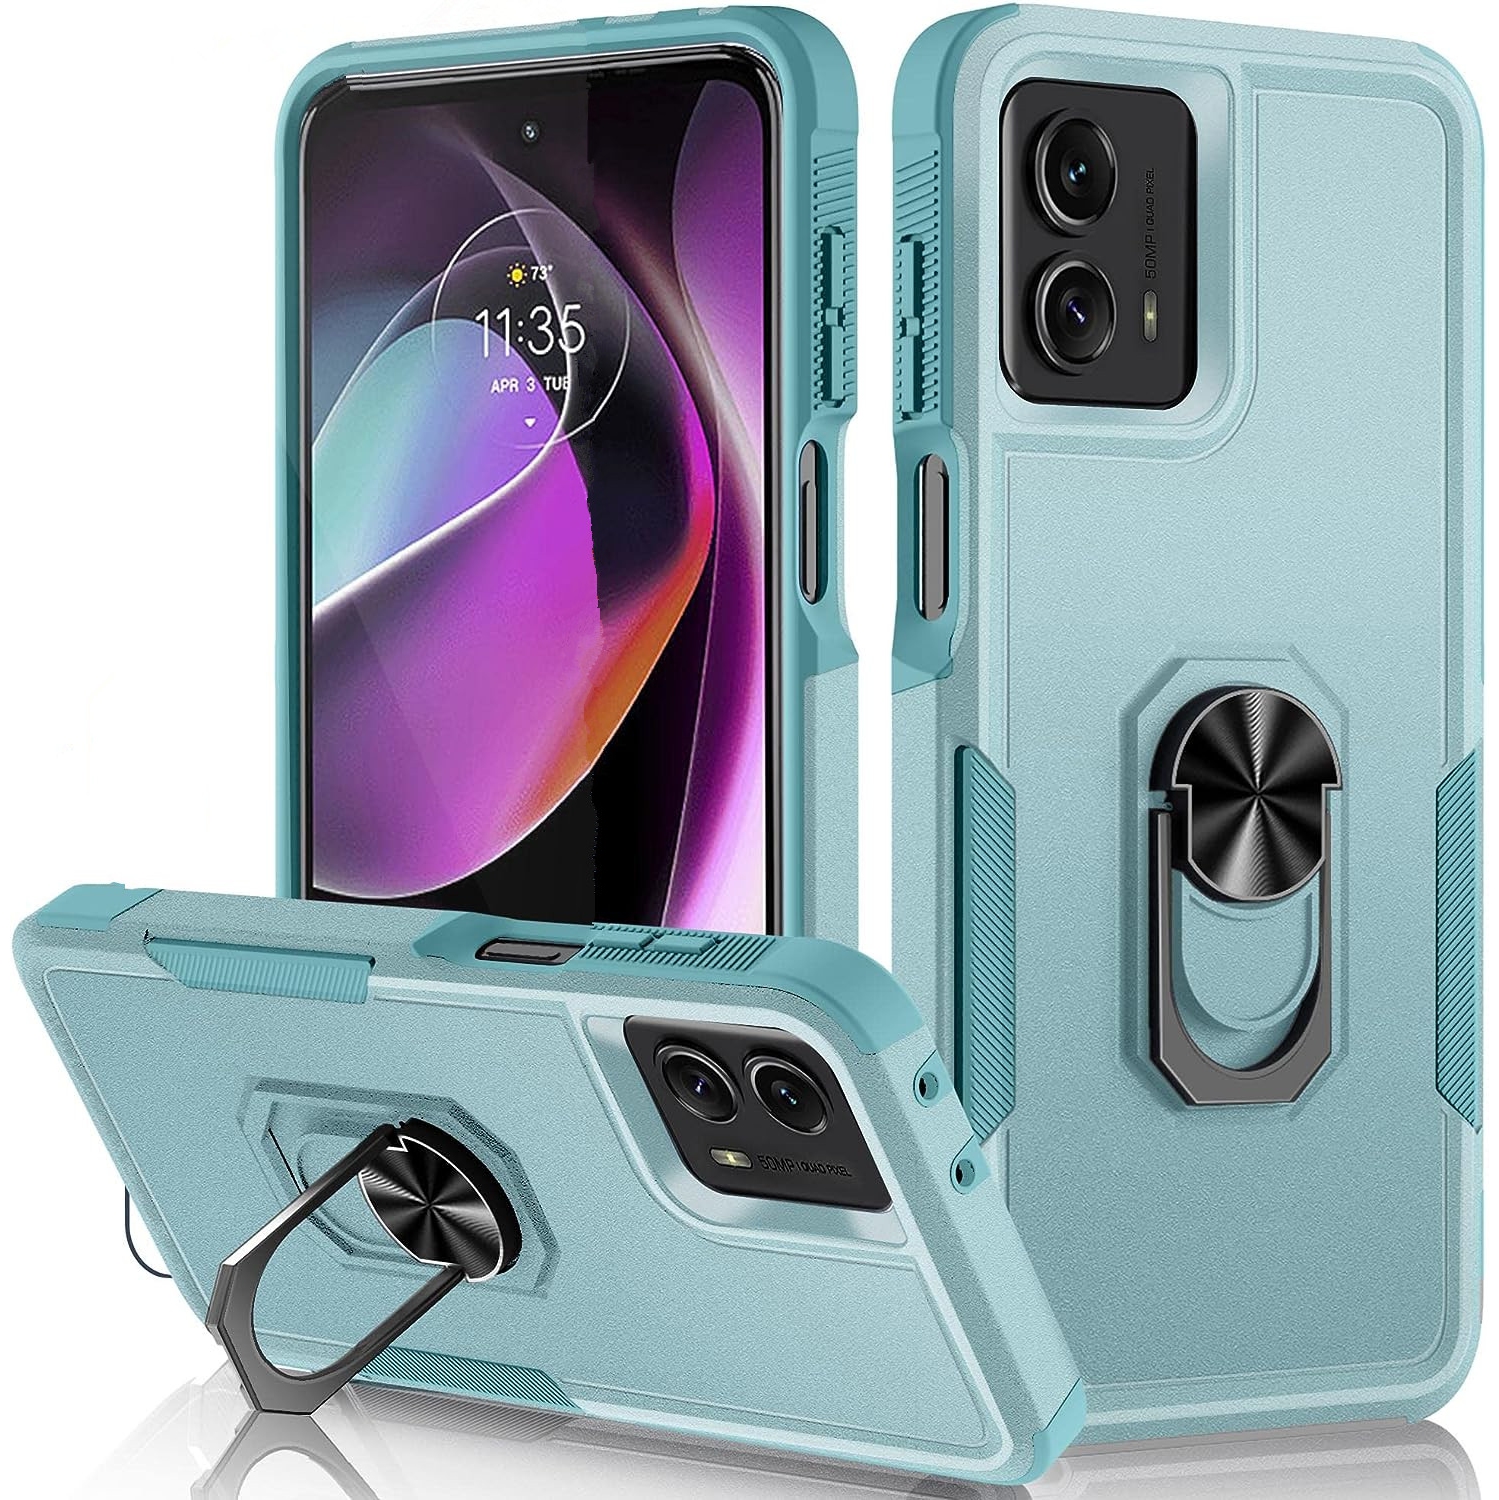 【CSmart】 Dual Layers Heavy Duty Magnetic Hard Case with Ring Holder for Motorola Moto G Power 2023 / Moto G 5G 2023, Teal